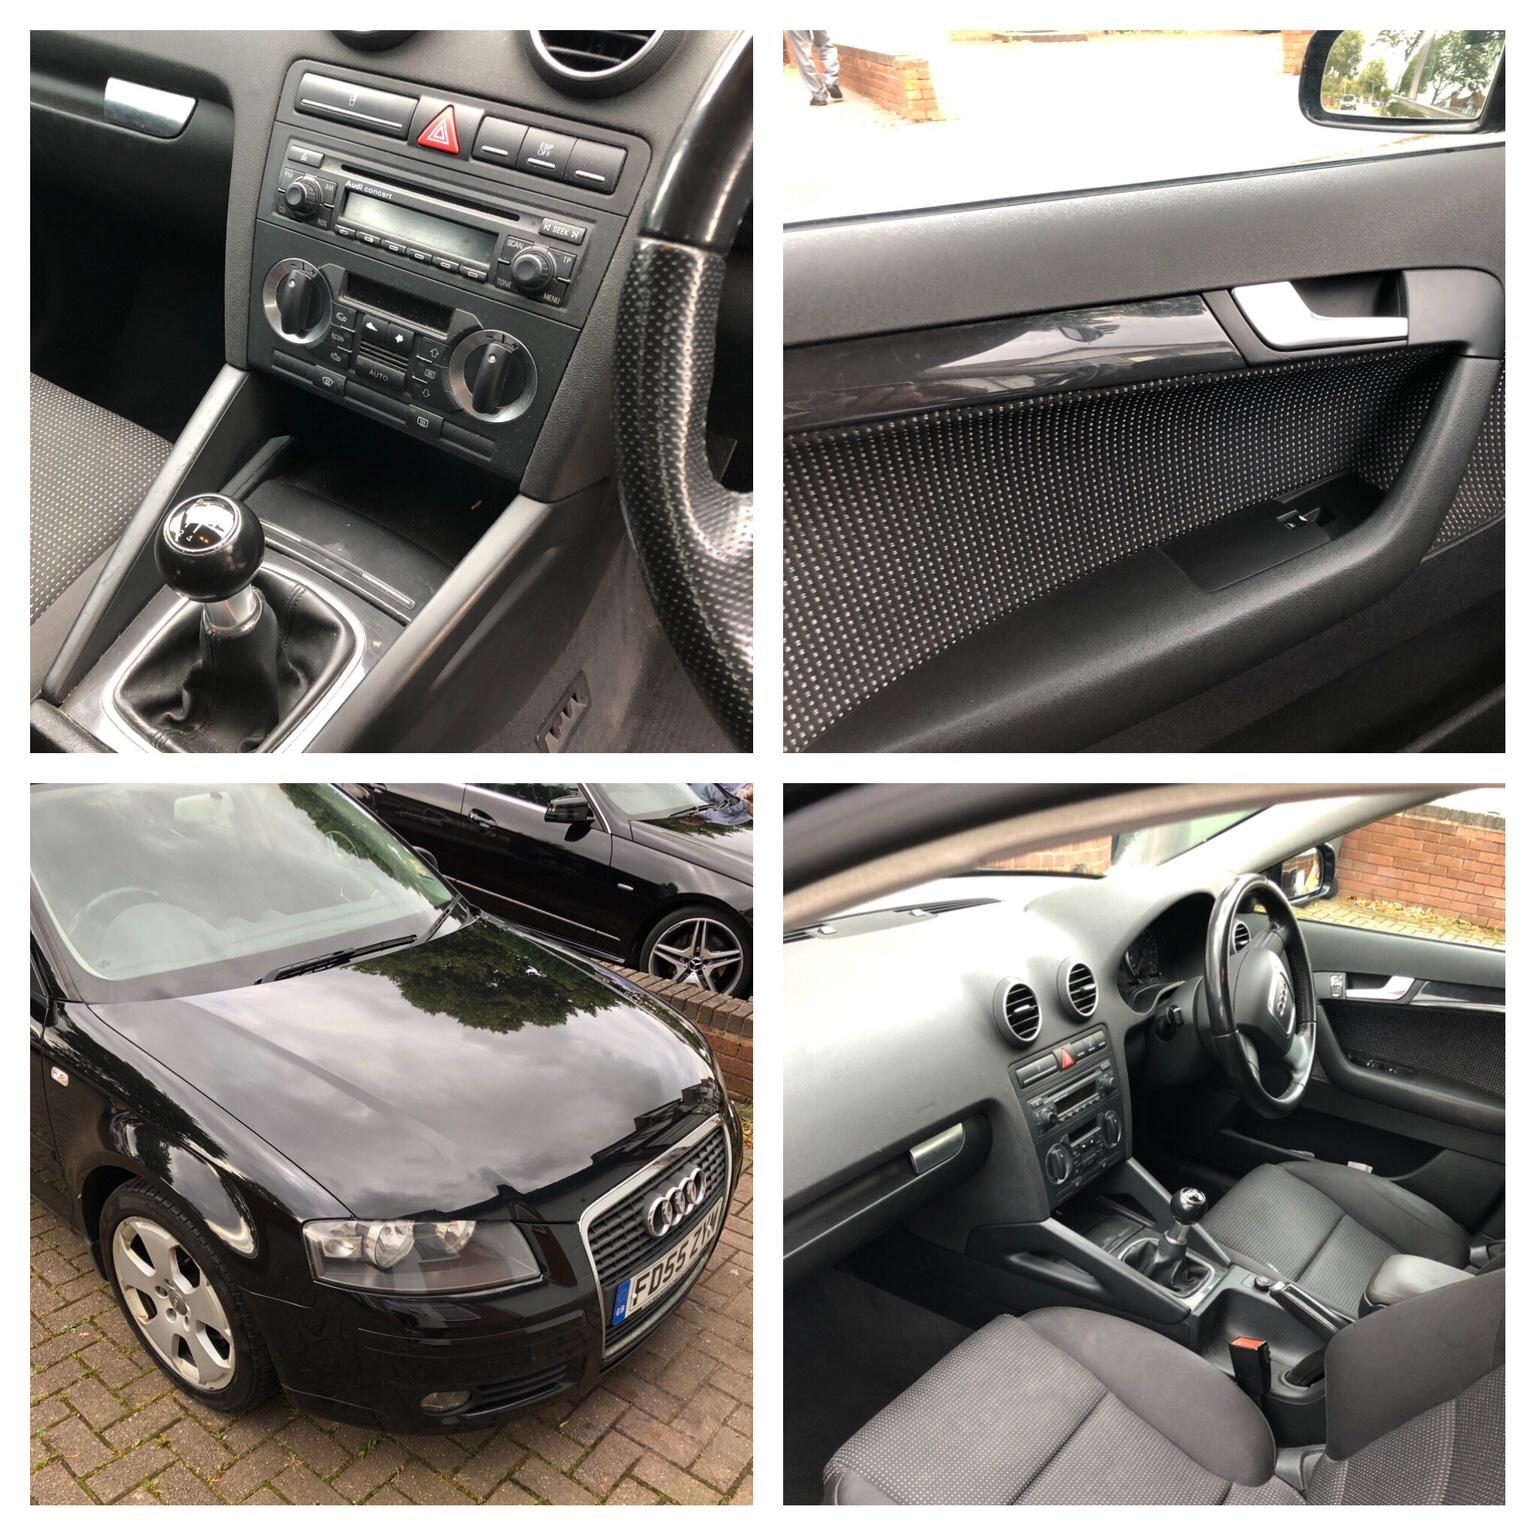 Audi A3 Tdi Sport In Wv4 Wolverhampton For 2 250 00 For